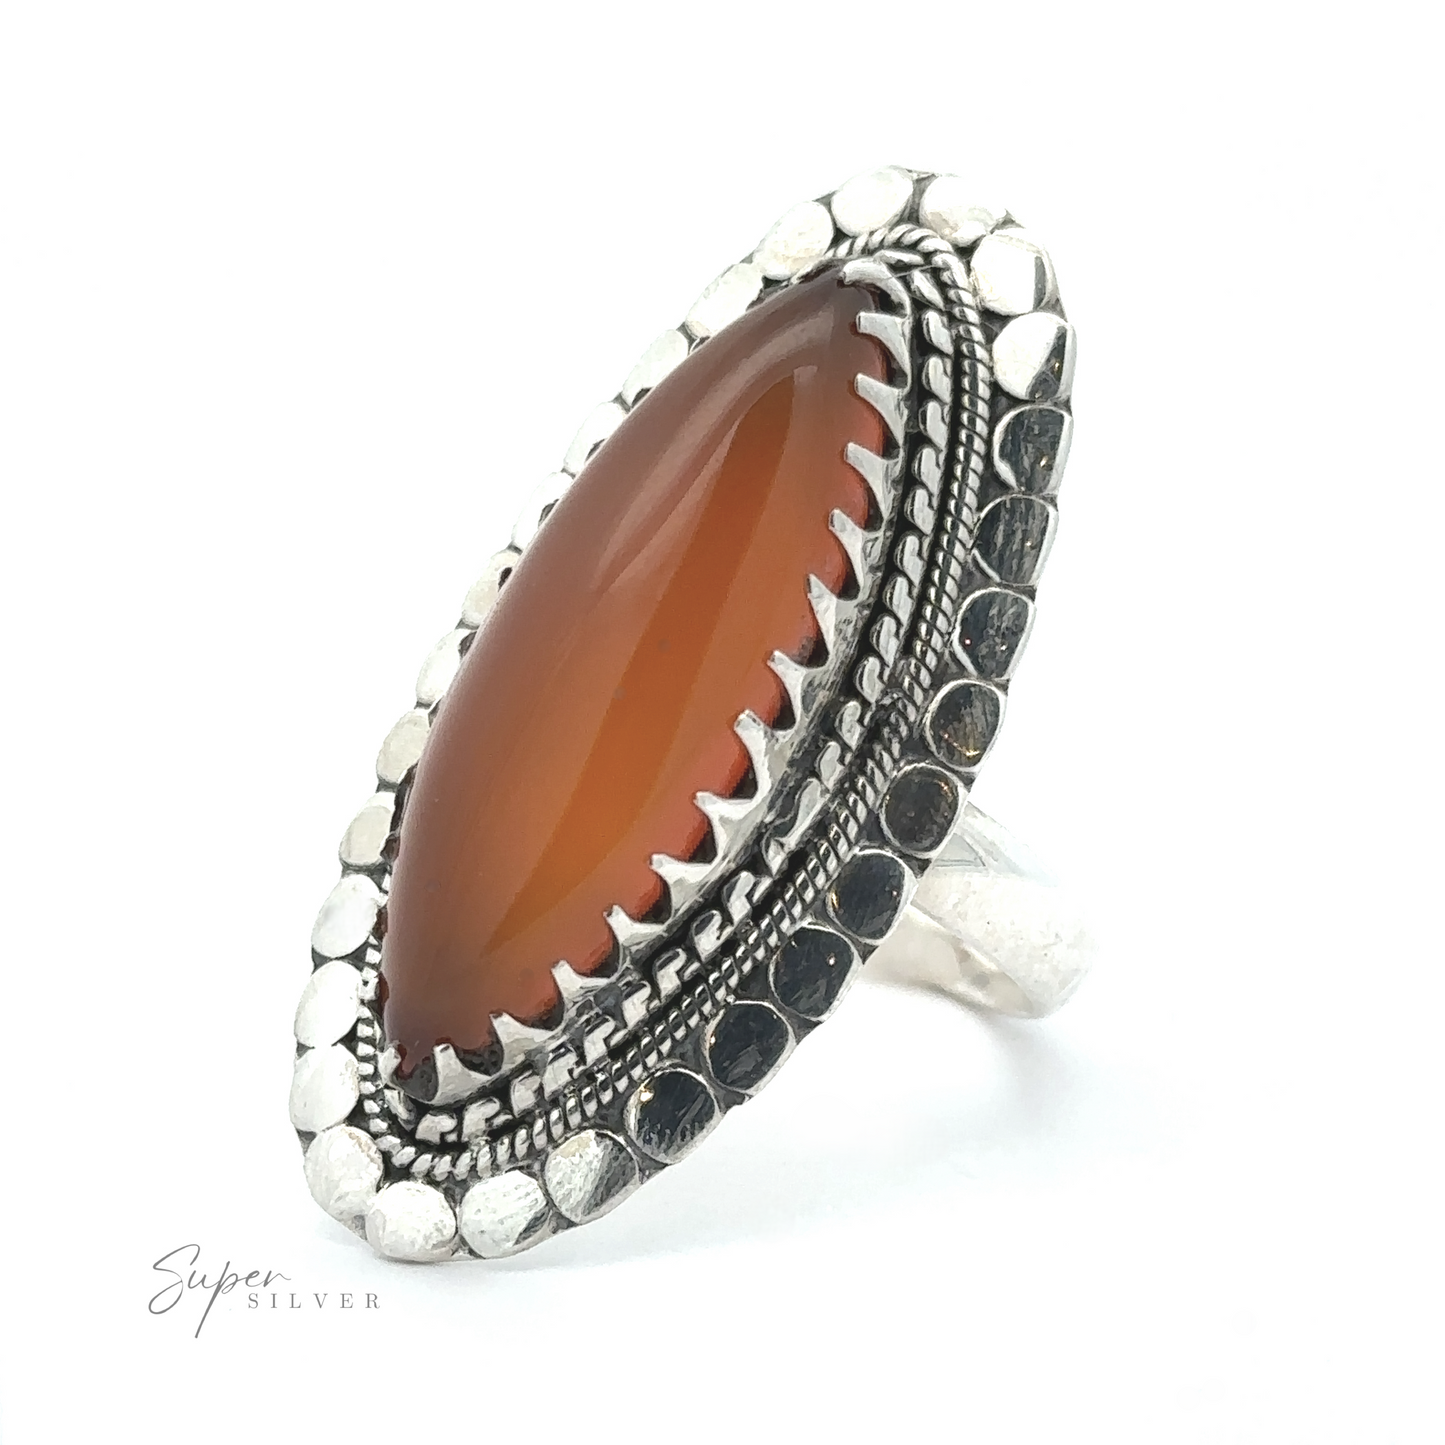 
                  
                    A Bohemian jewelry piece, the Statement Marquise Shaped Gemstone Ring features a large oval, reddish-brown stone in the center, surrounded by intricate metalwork and a border of small metallic beads.
                  
                